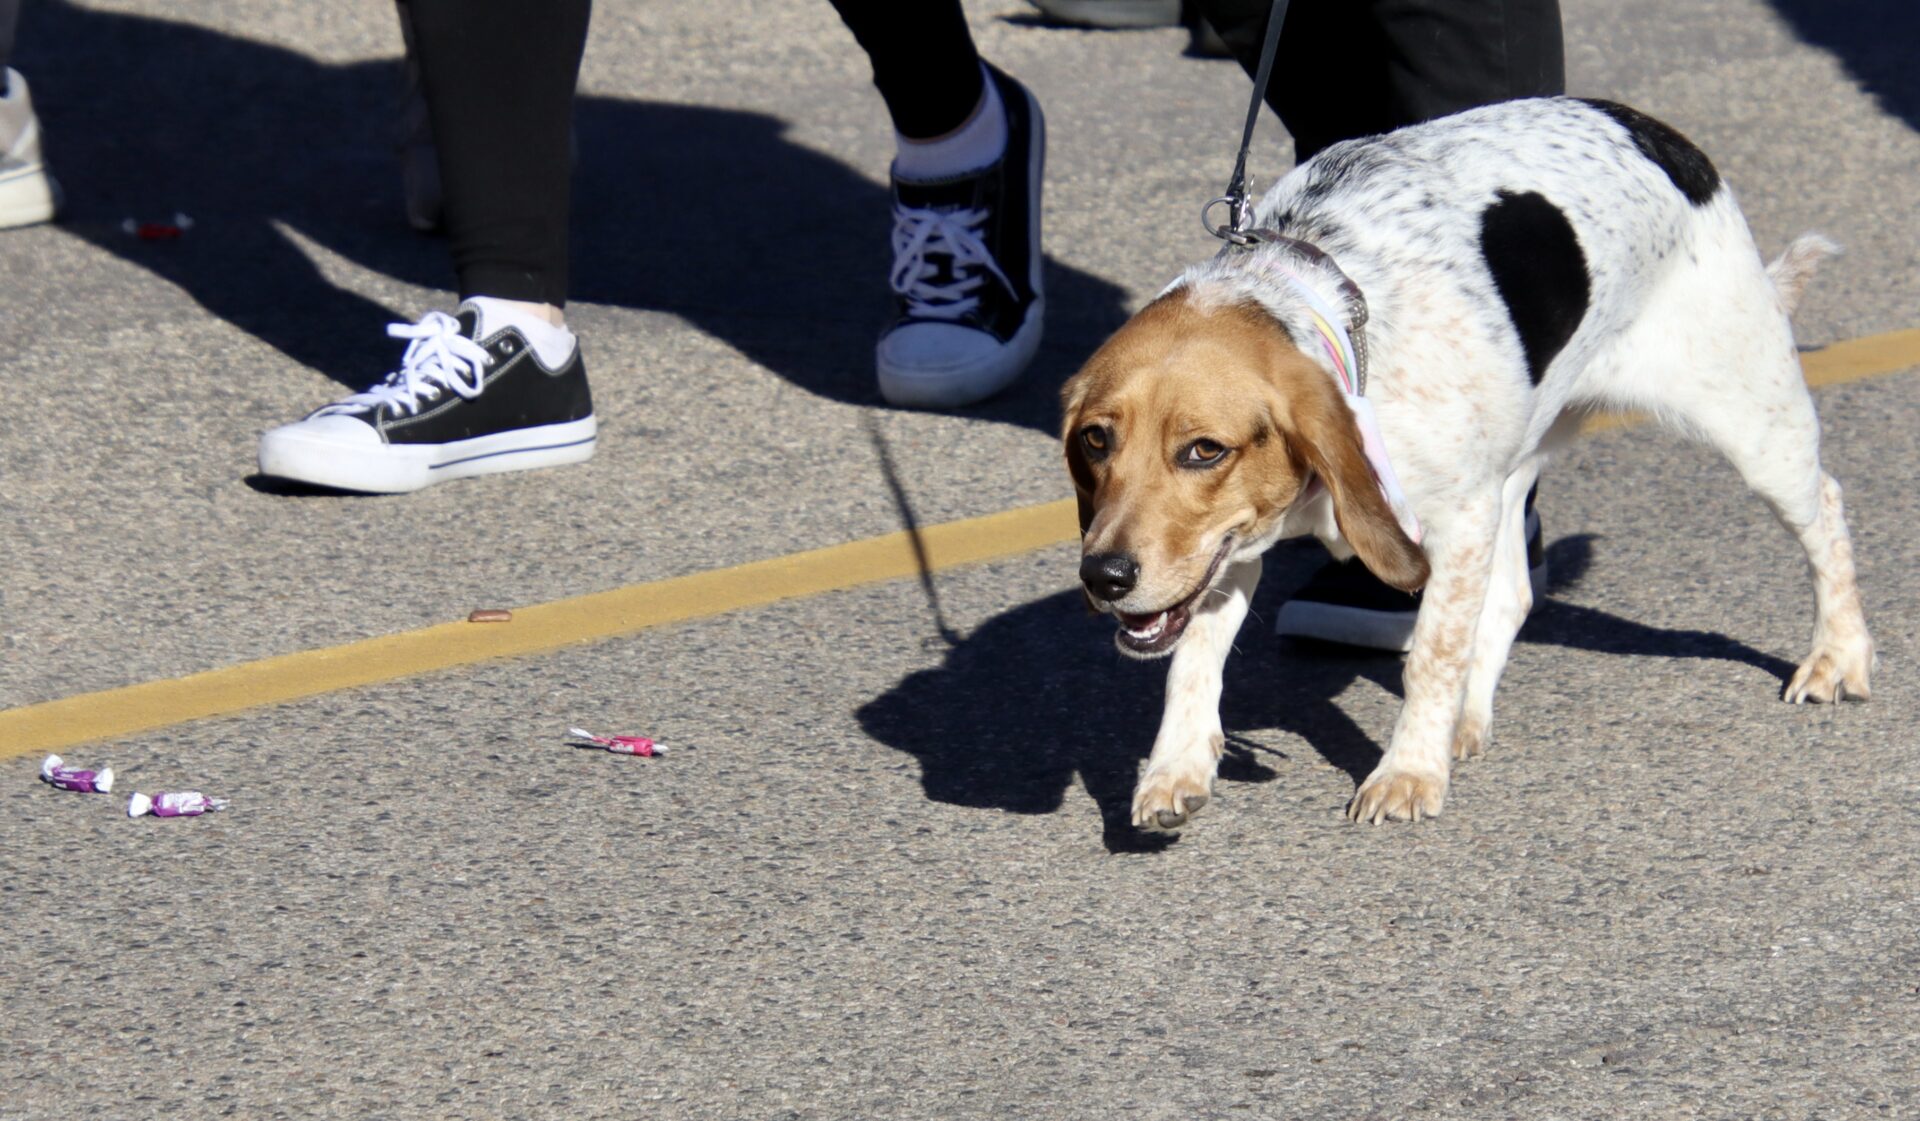 Northern State's homecoming parade on Saturday, Oct 7 wasn't all bands, Wolves and Elvis impersonators. A couple of dogs made their way down Main Street, too.